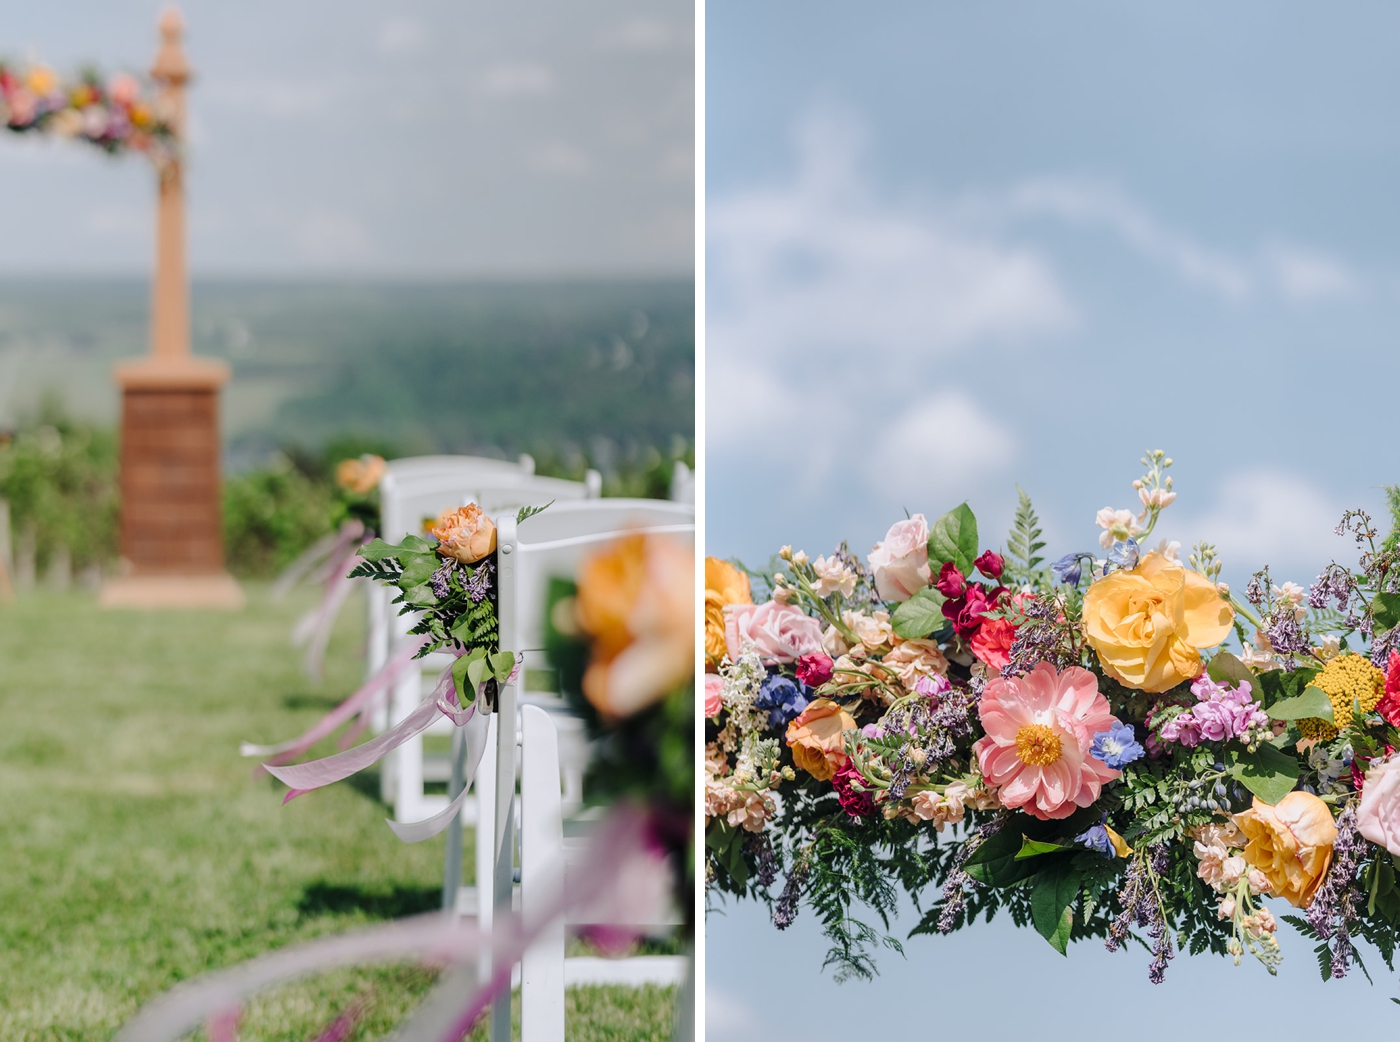 White folding chairs, a wooden archway, and pink and orange florals for a spring wedding ceremony